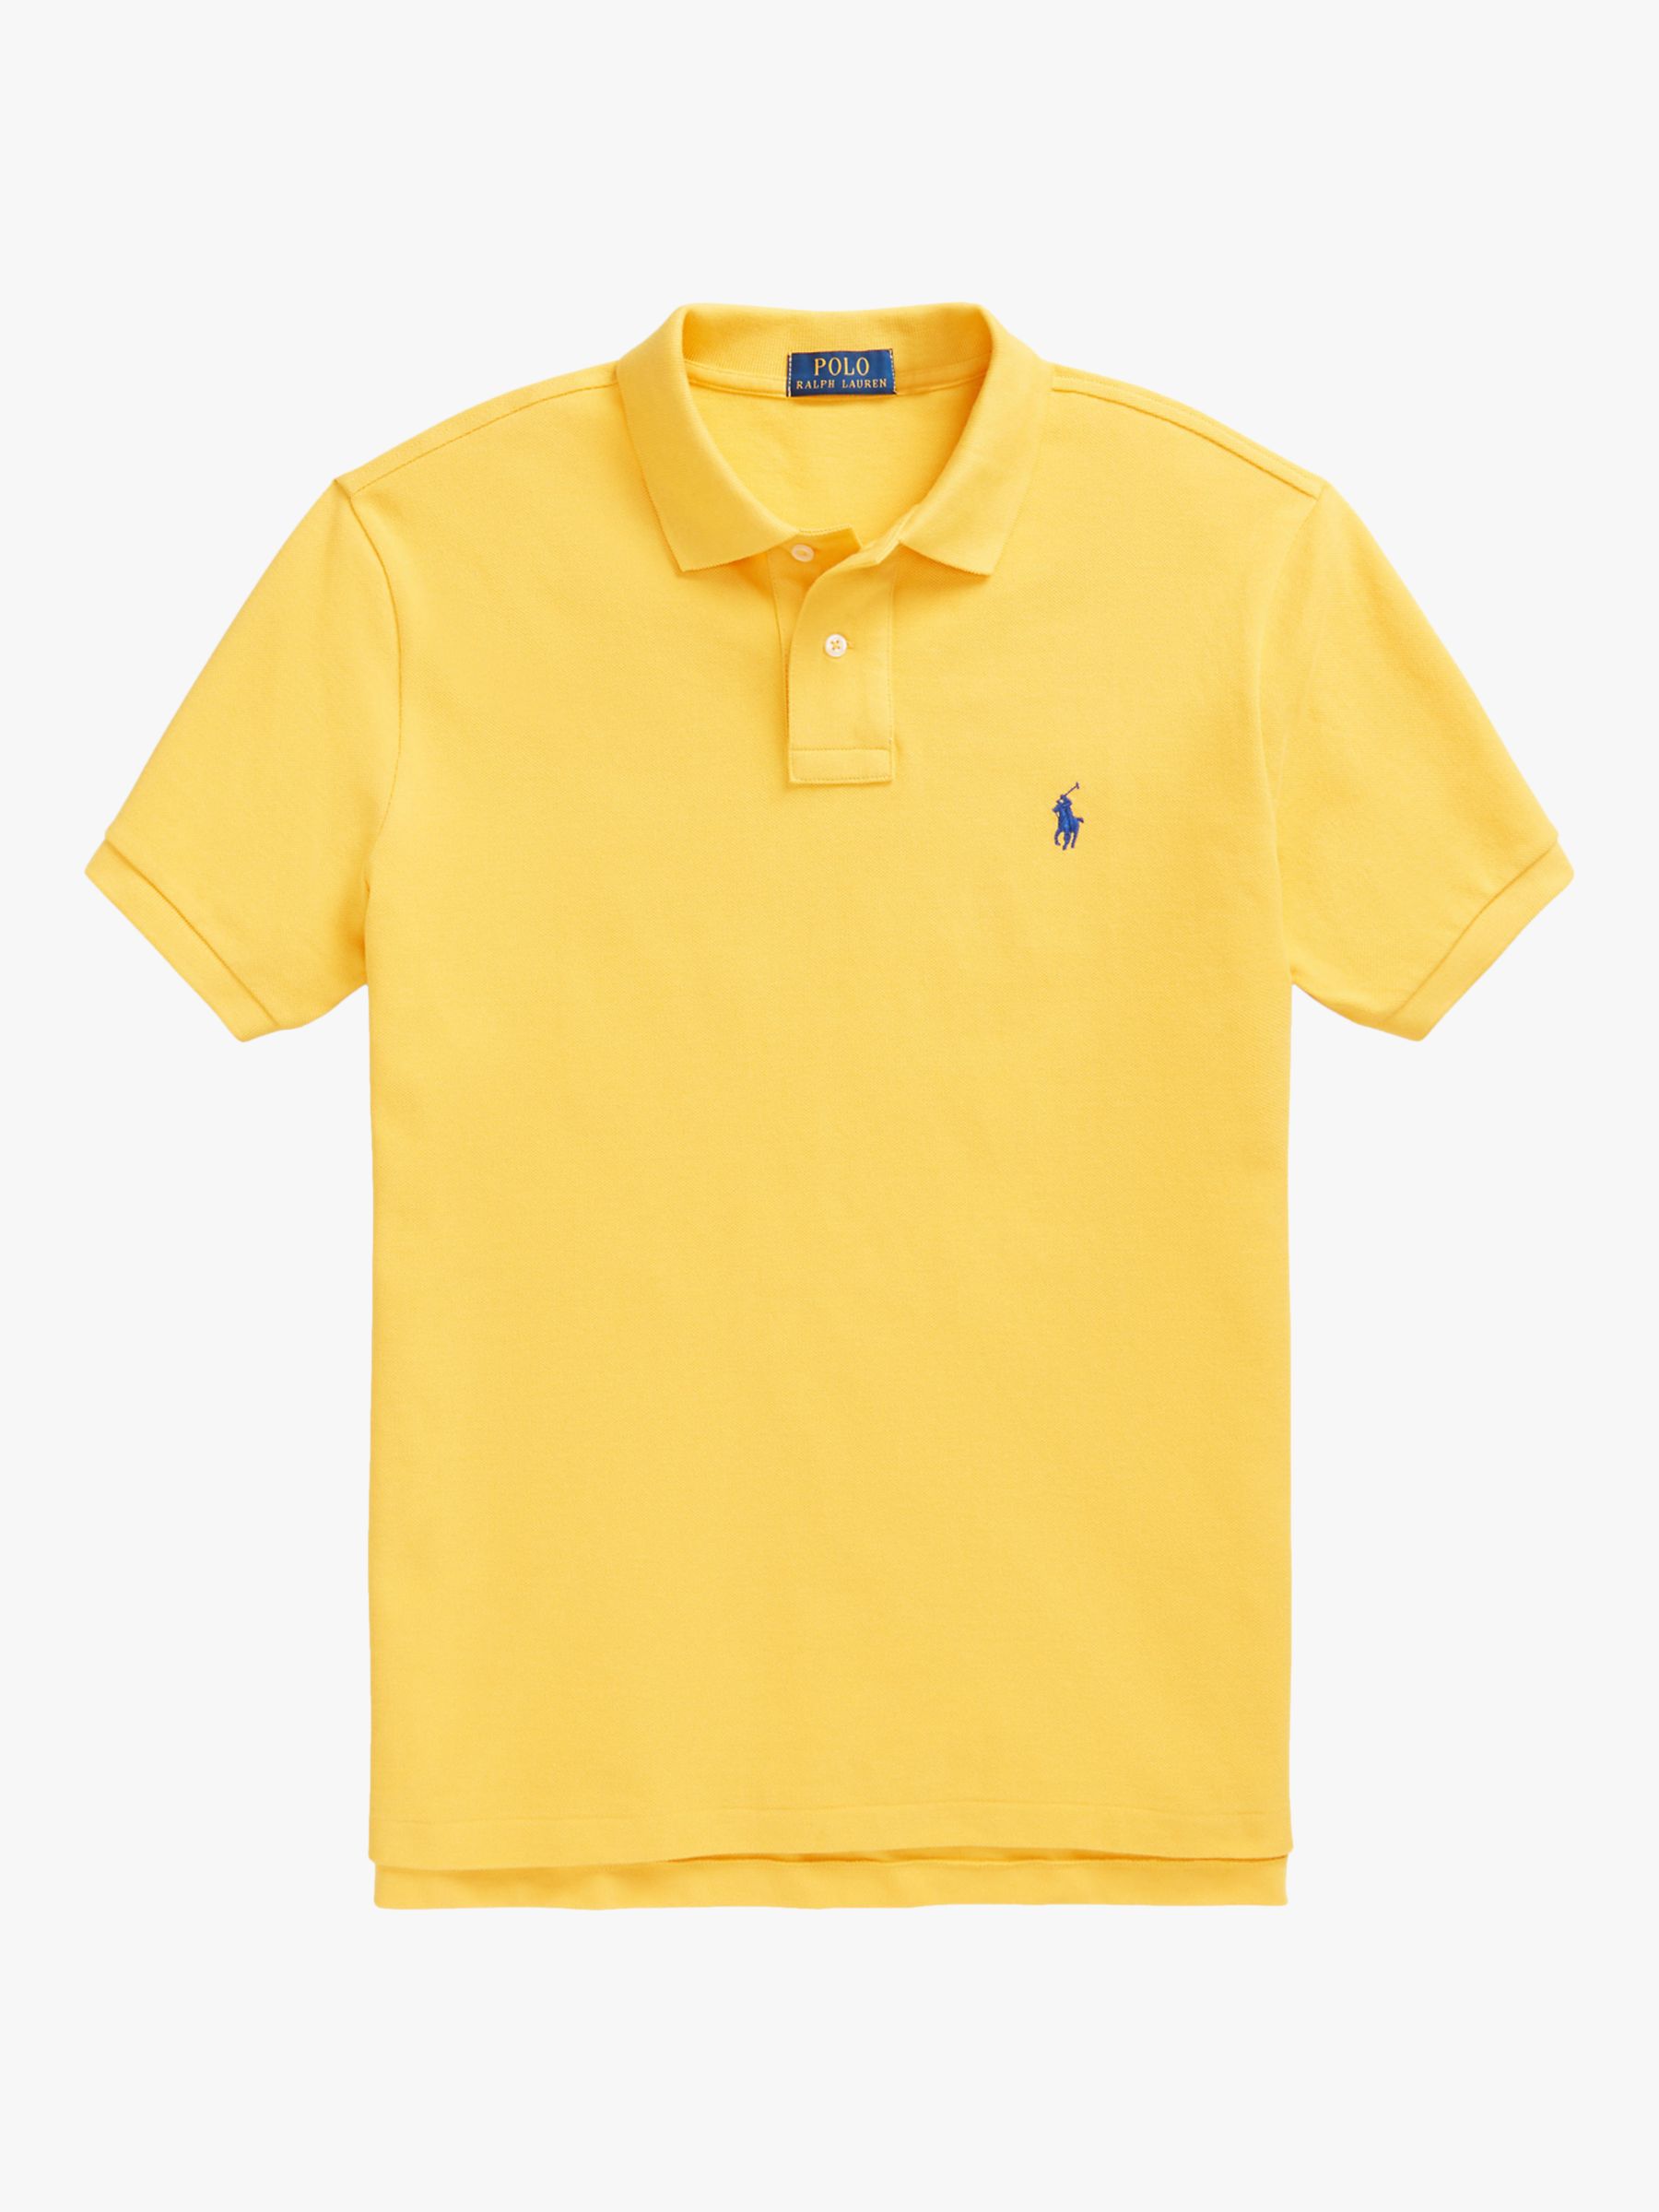 Polo Ralph Lauren Slim Fit Polo Top, Gold Bugle at John Lewis & Partners